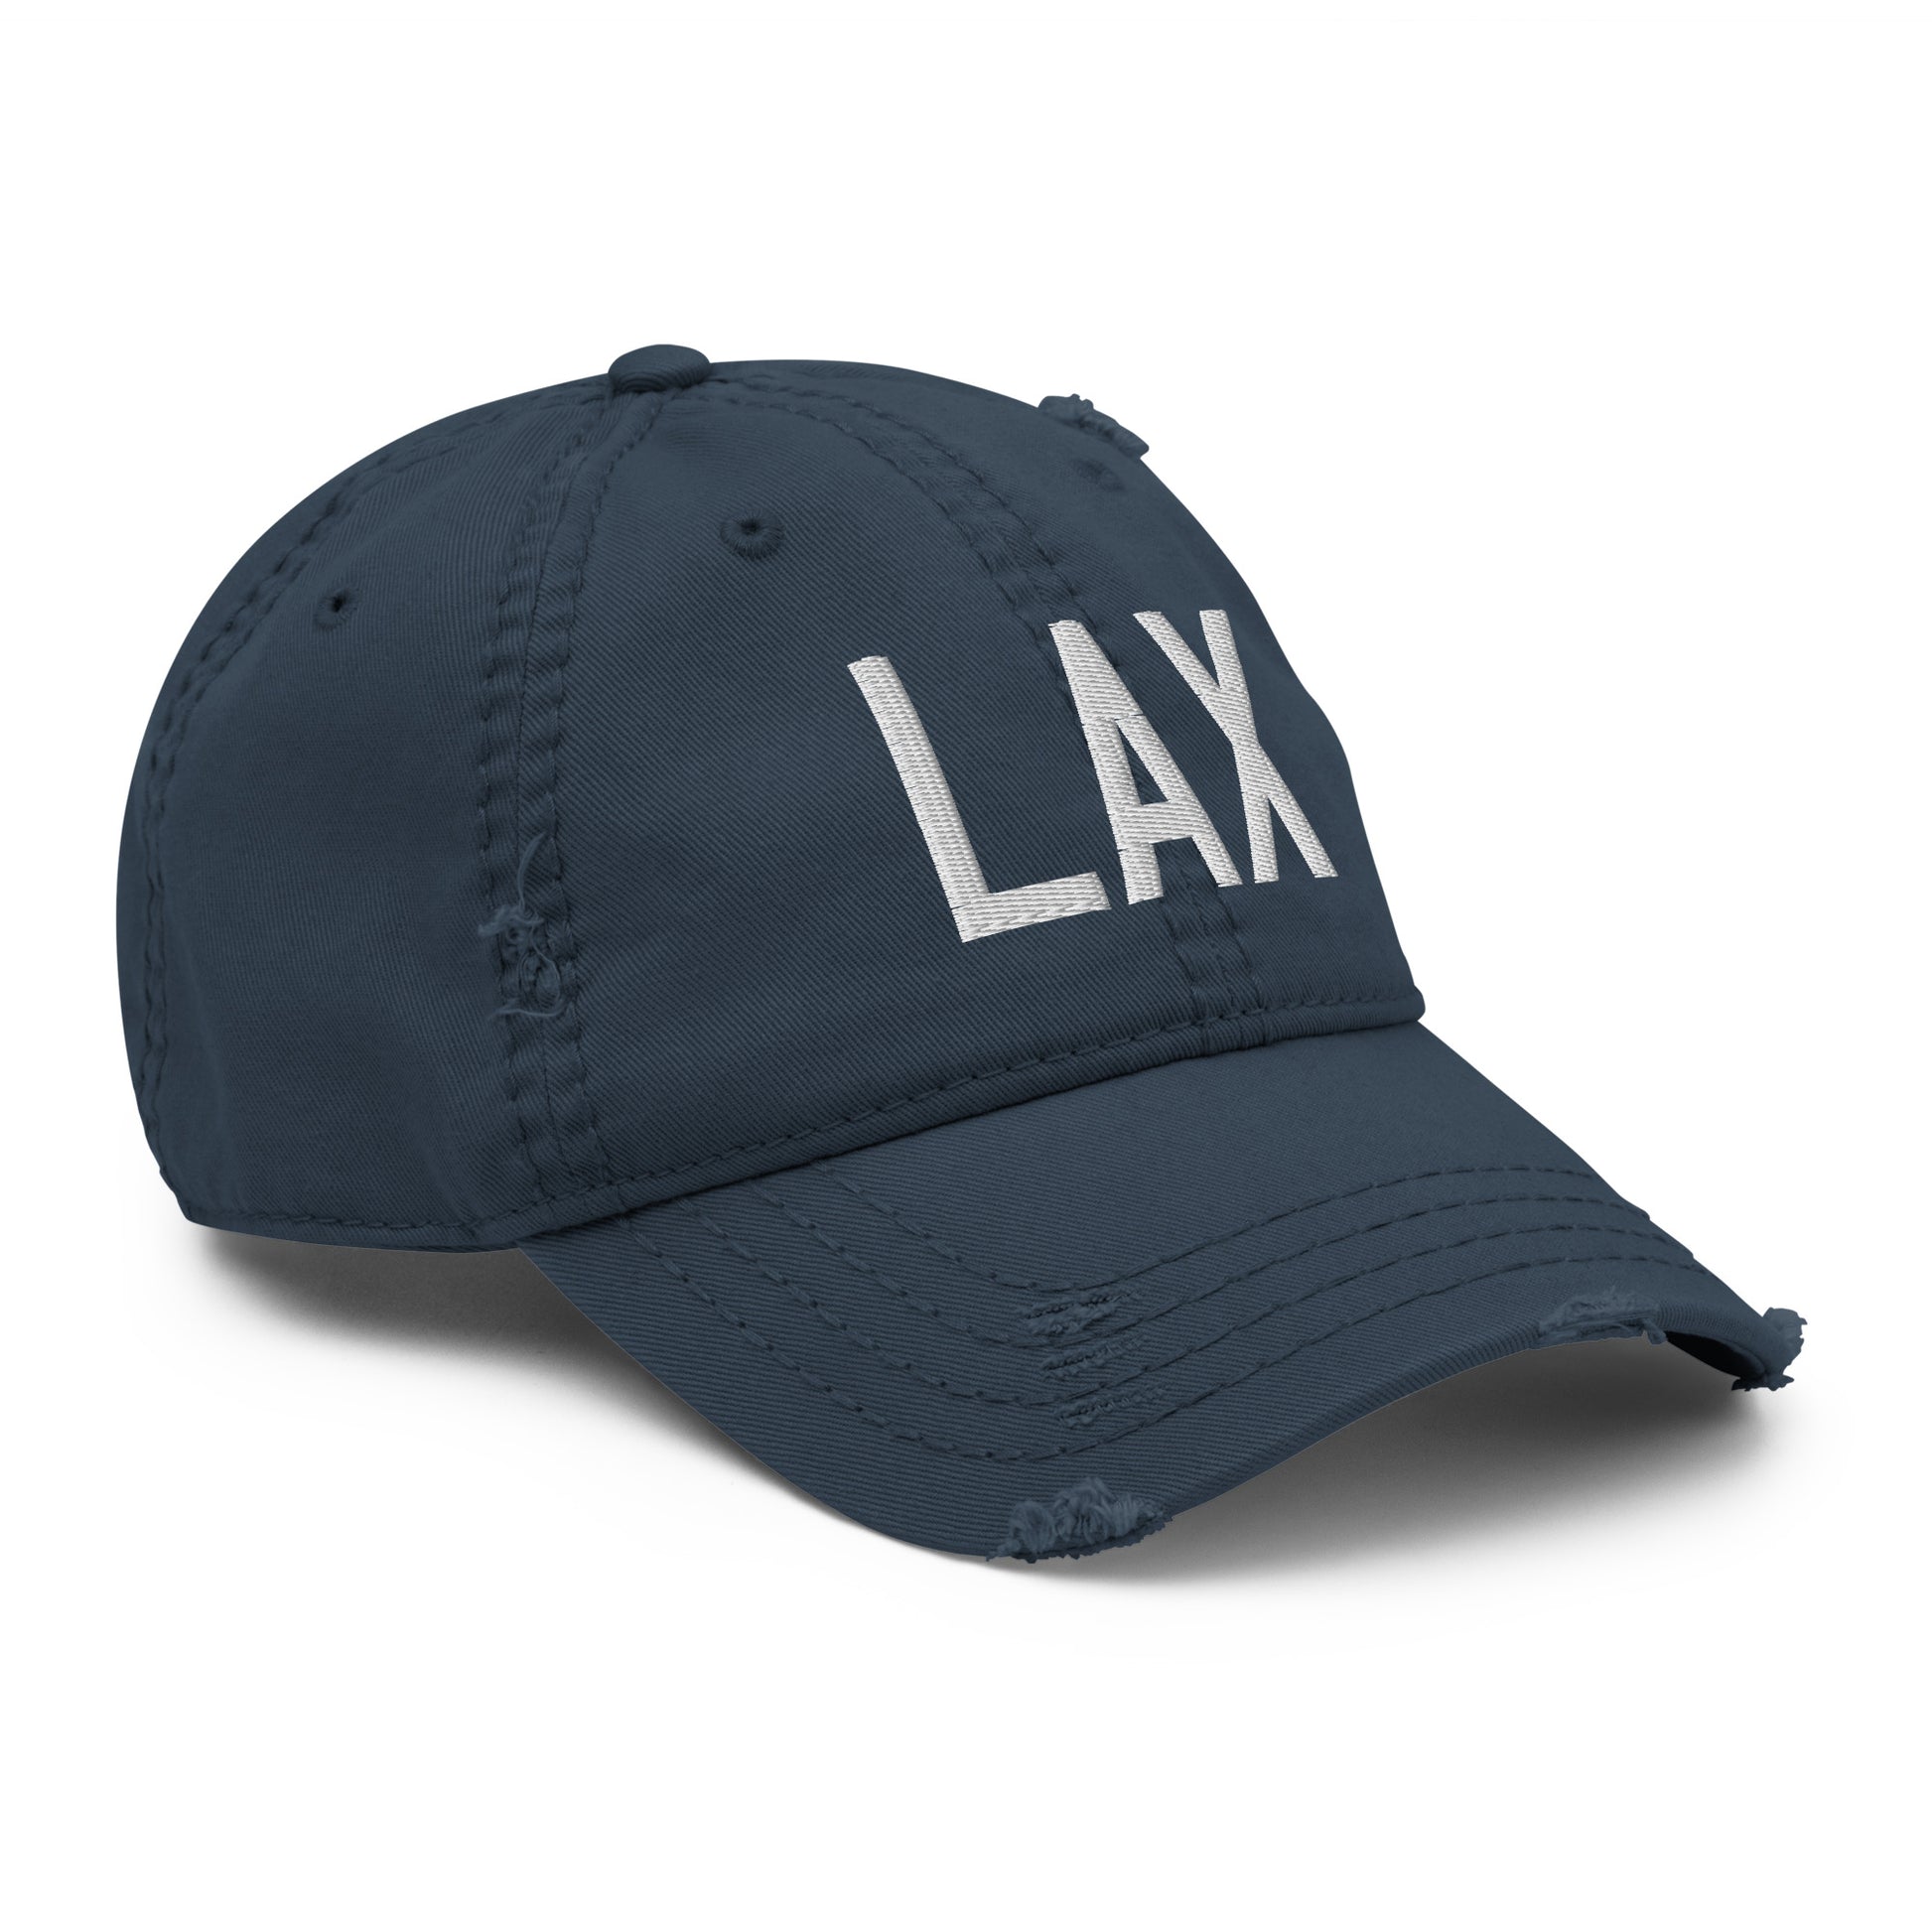 Airport Code Distressed Hat - White • LAX Los Angeles • YHM Designs - Image 14